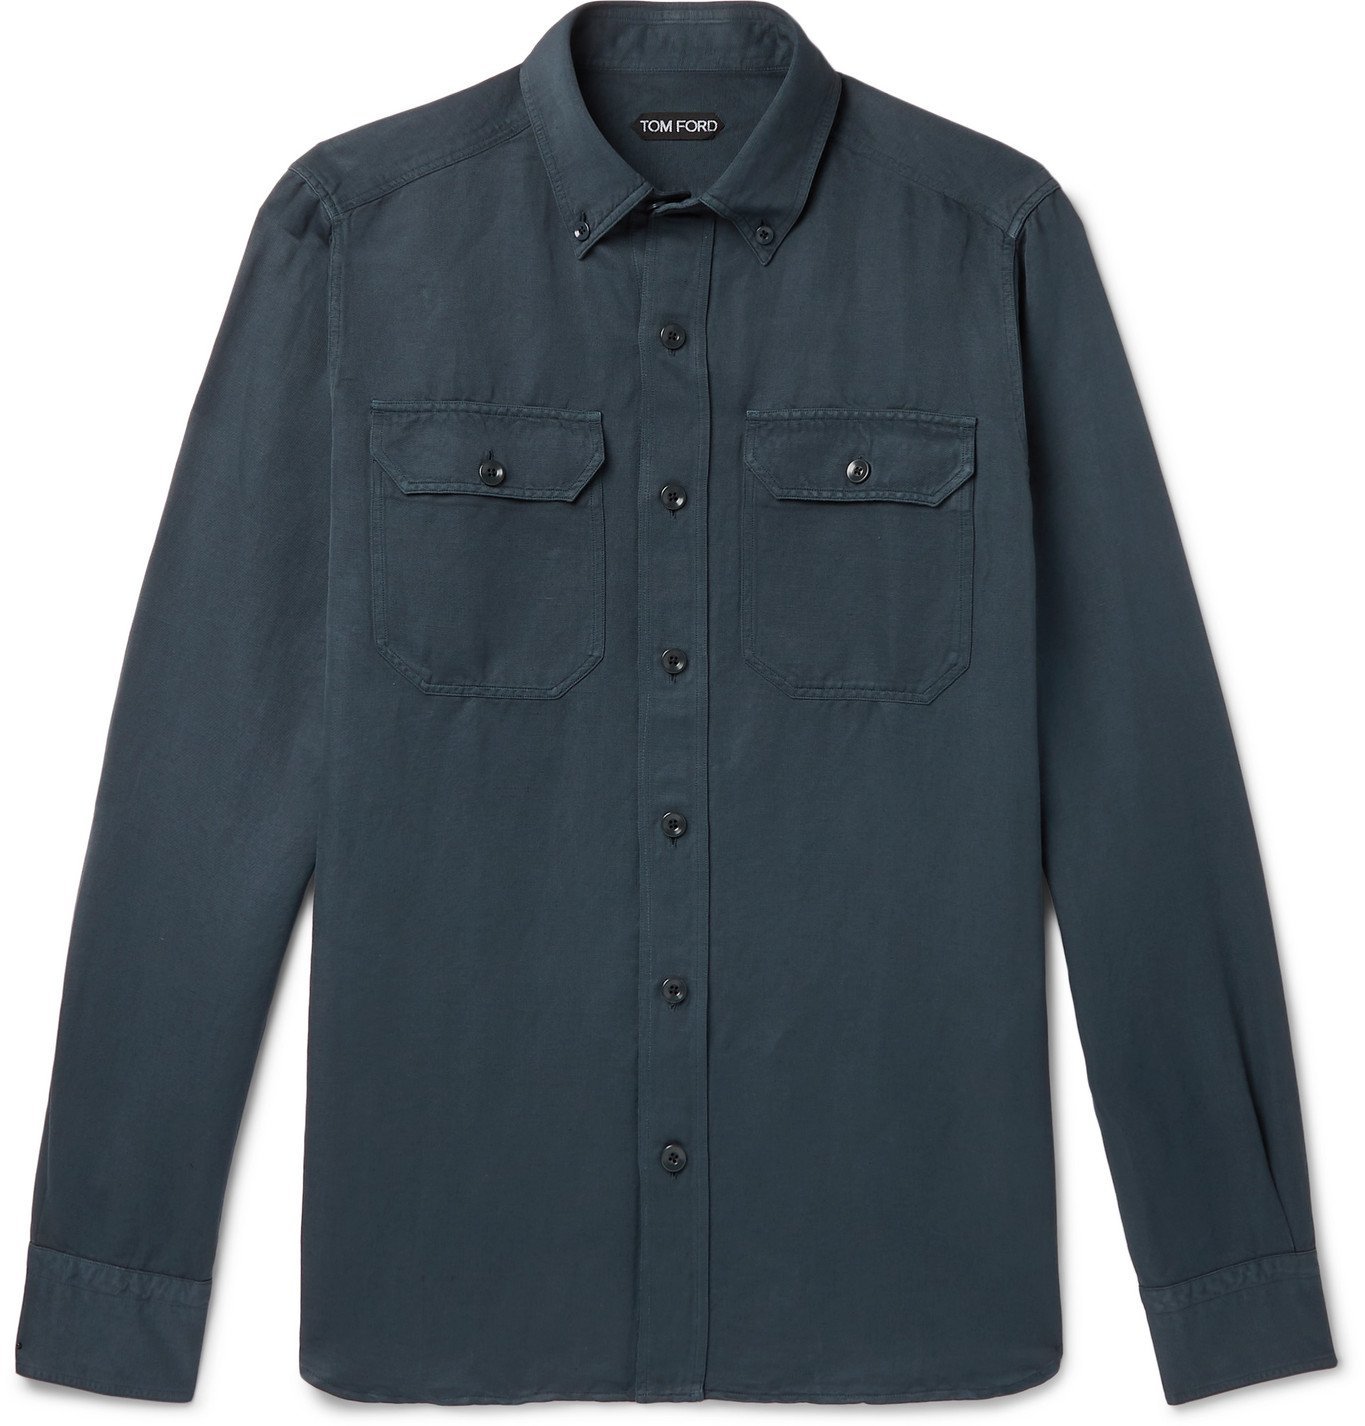 TOM FORD - Slim-Fit Button-Down Collar Garment-Dyed Linen and Cotton-Blend  Shirt - Blue TOM FORD